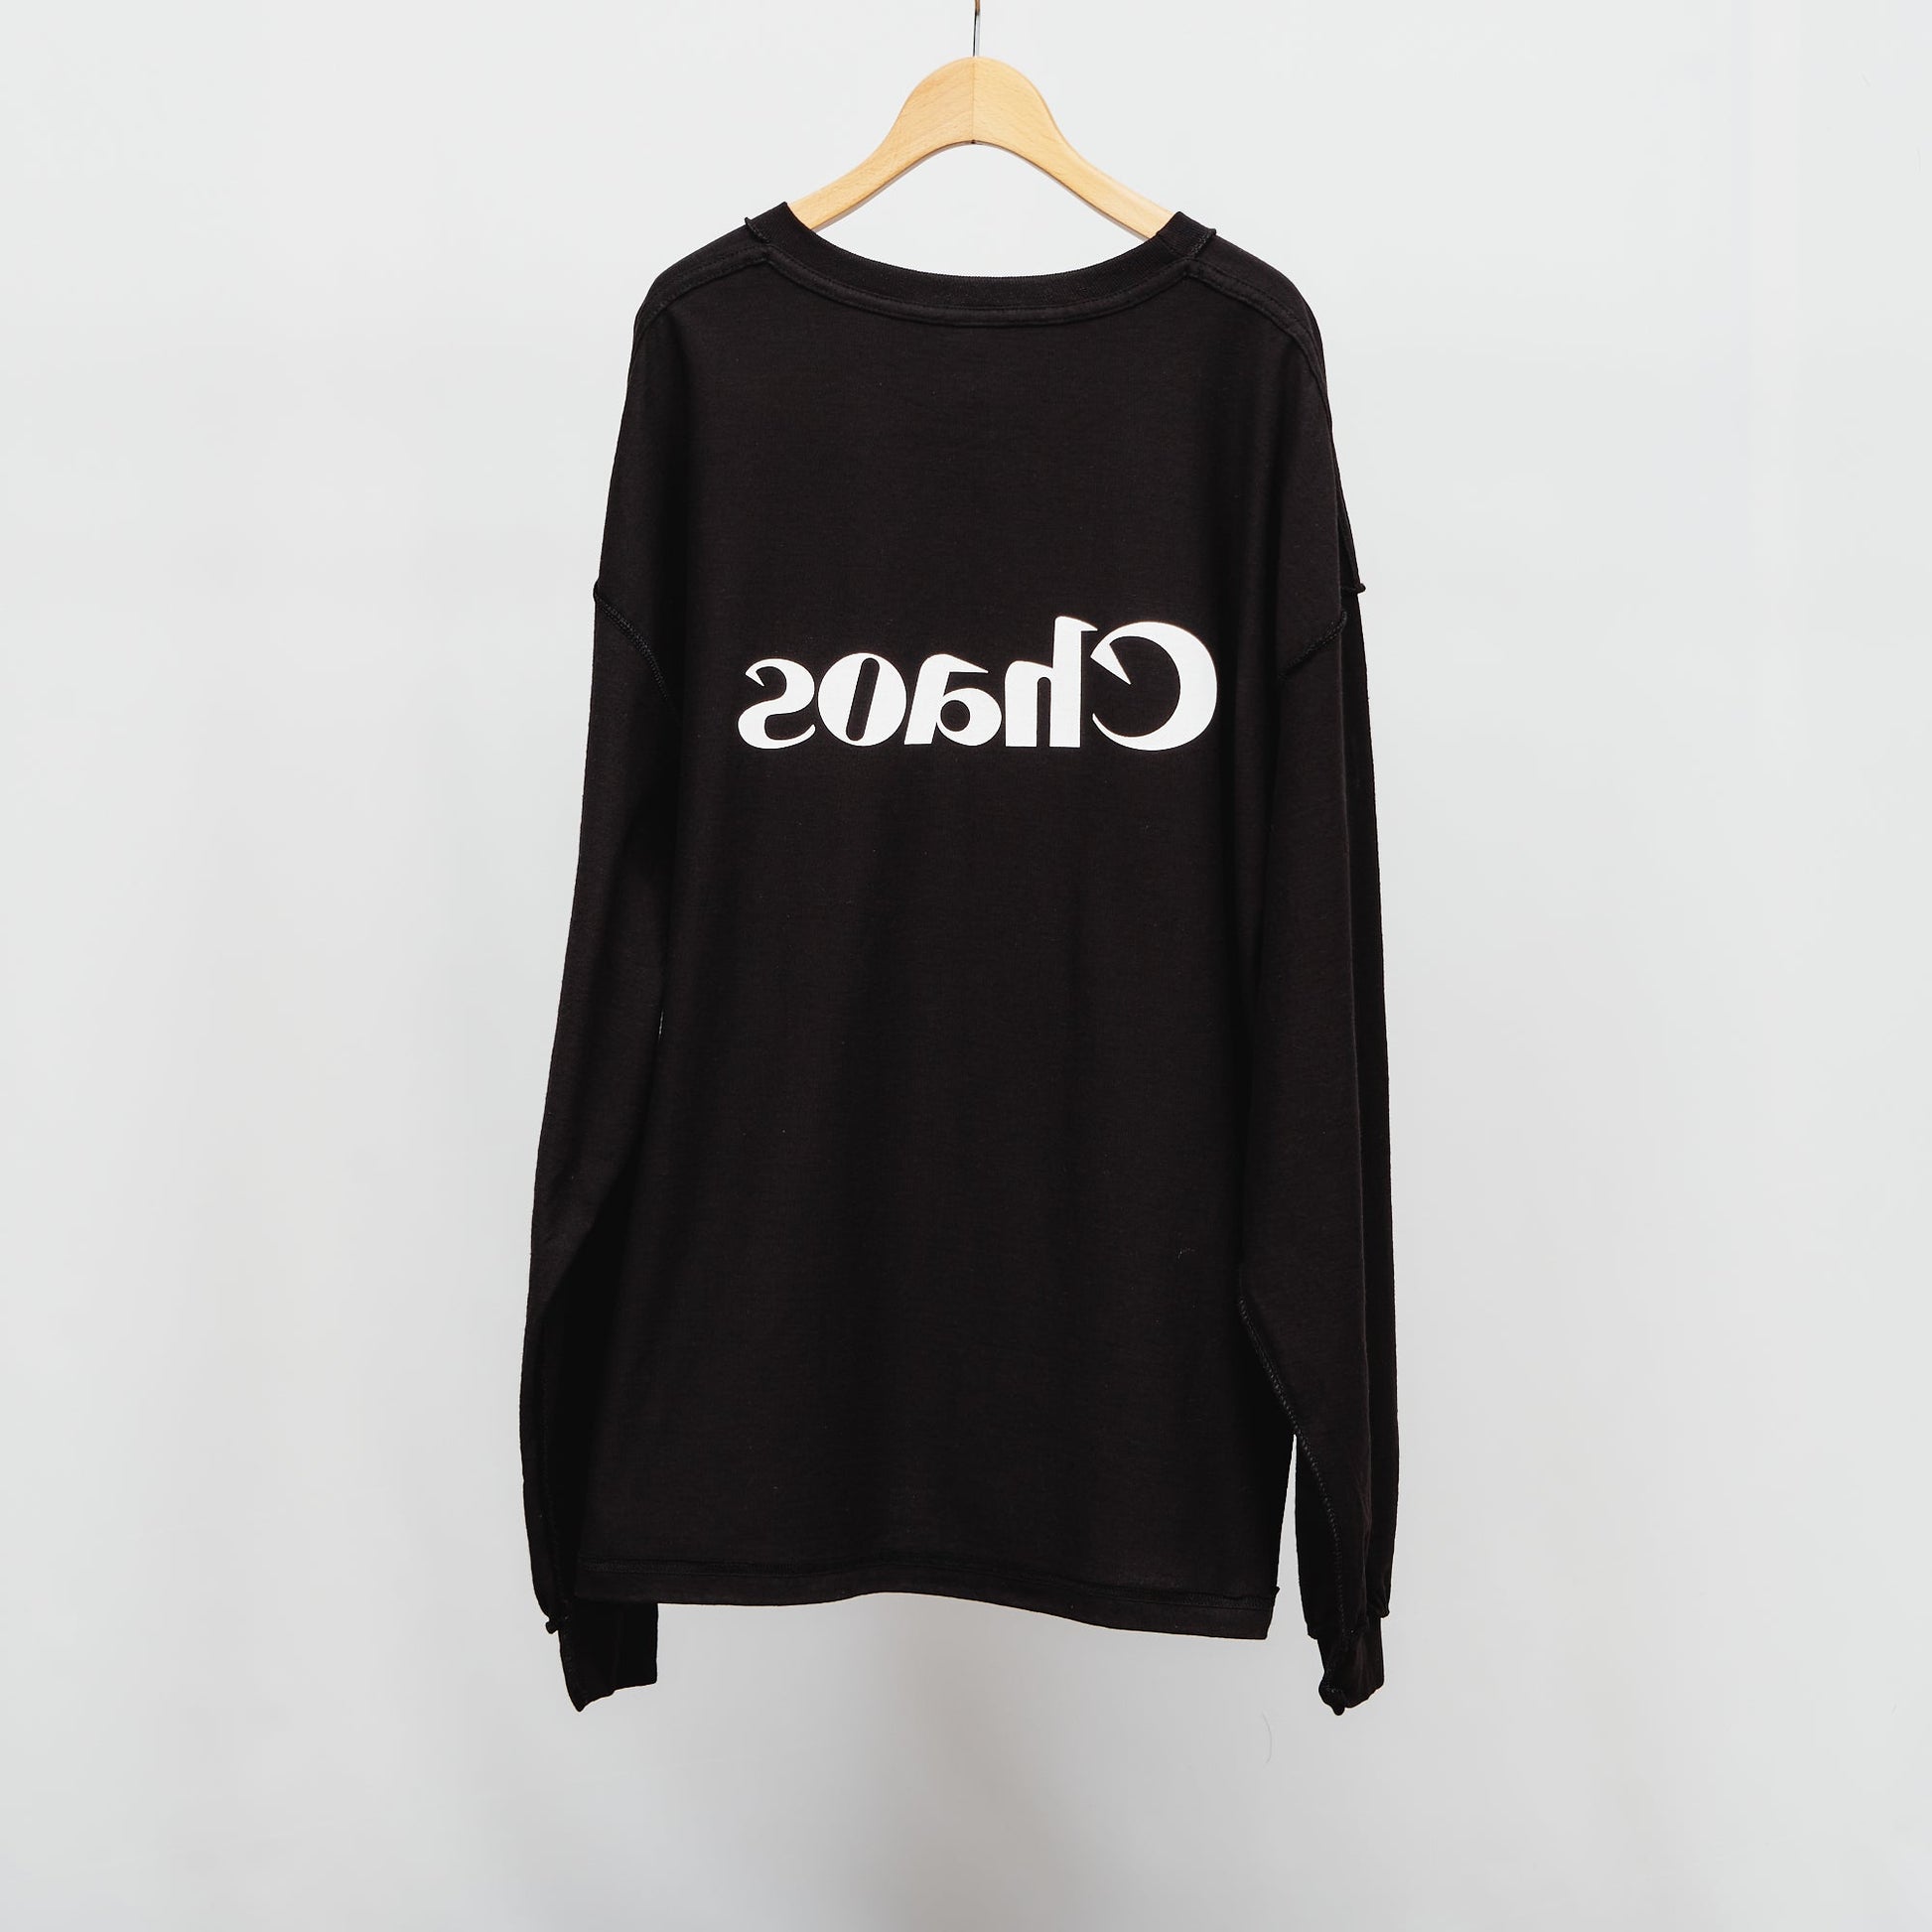 CHAOS L/S T-SHIRTS is-ness online shop 3